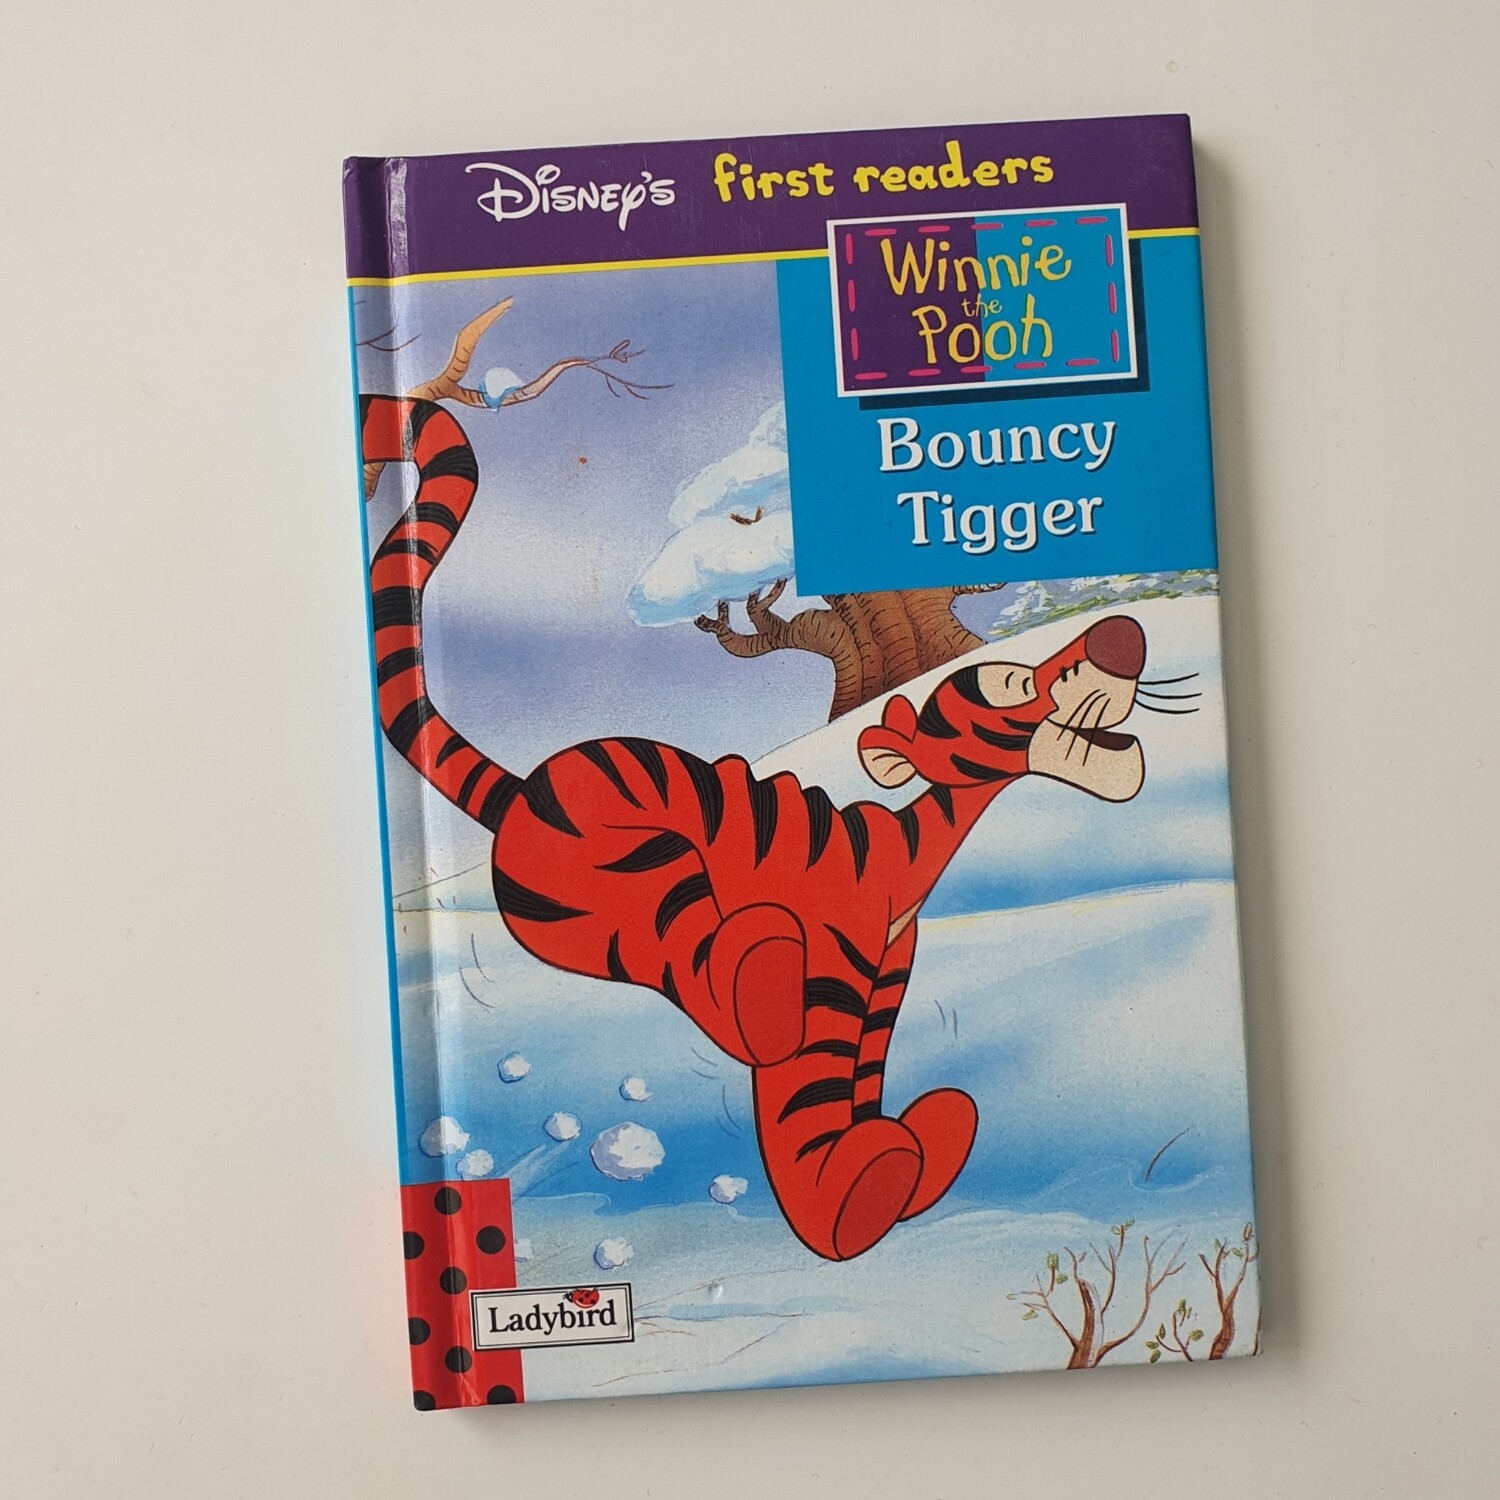 Bouncy Tigger - Winnie the Pooh Notebook